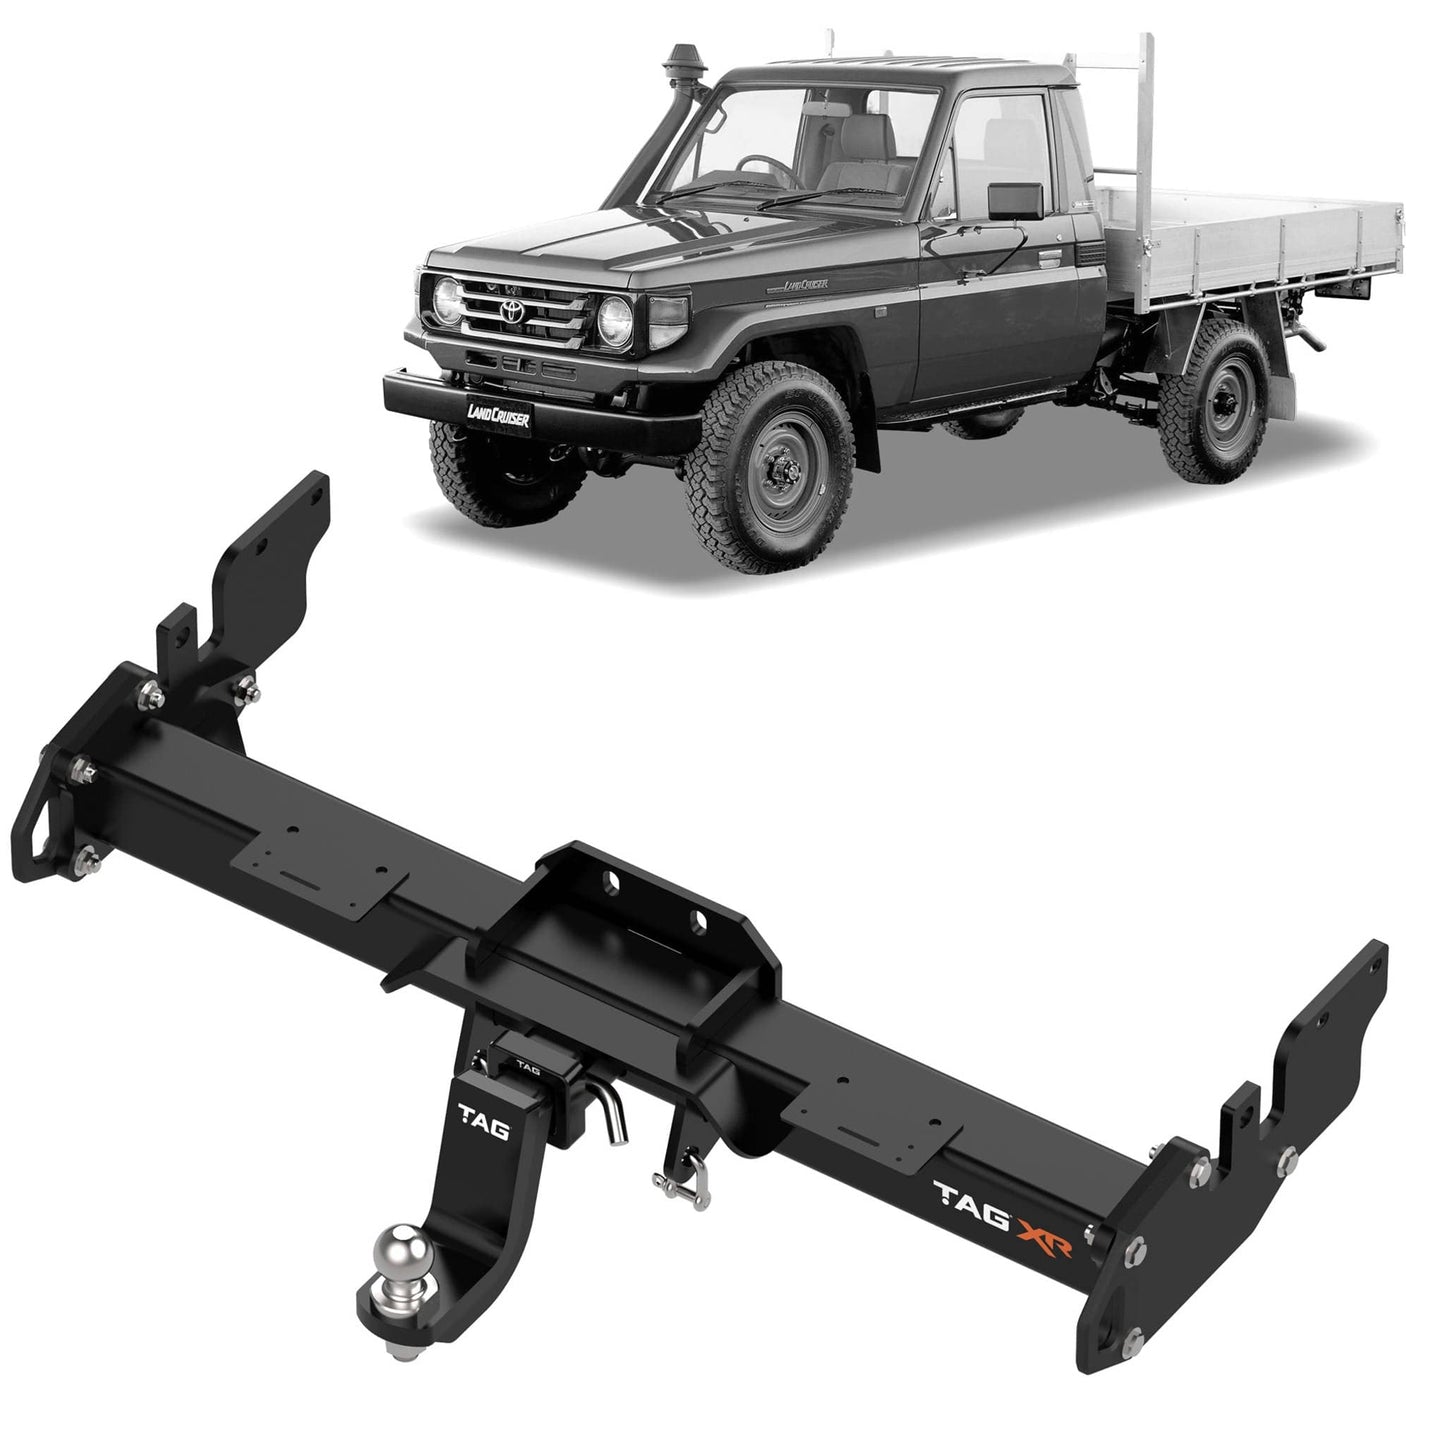 TAG 4x4 Recovery Towbar for Toyota Landcruiser (10/1990 - 07/2012)